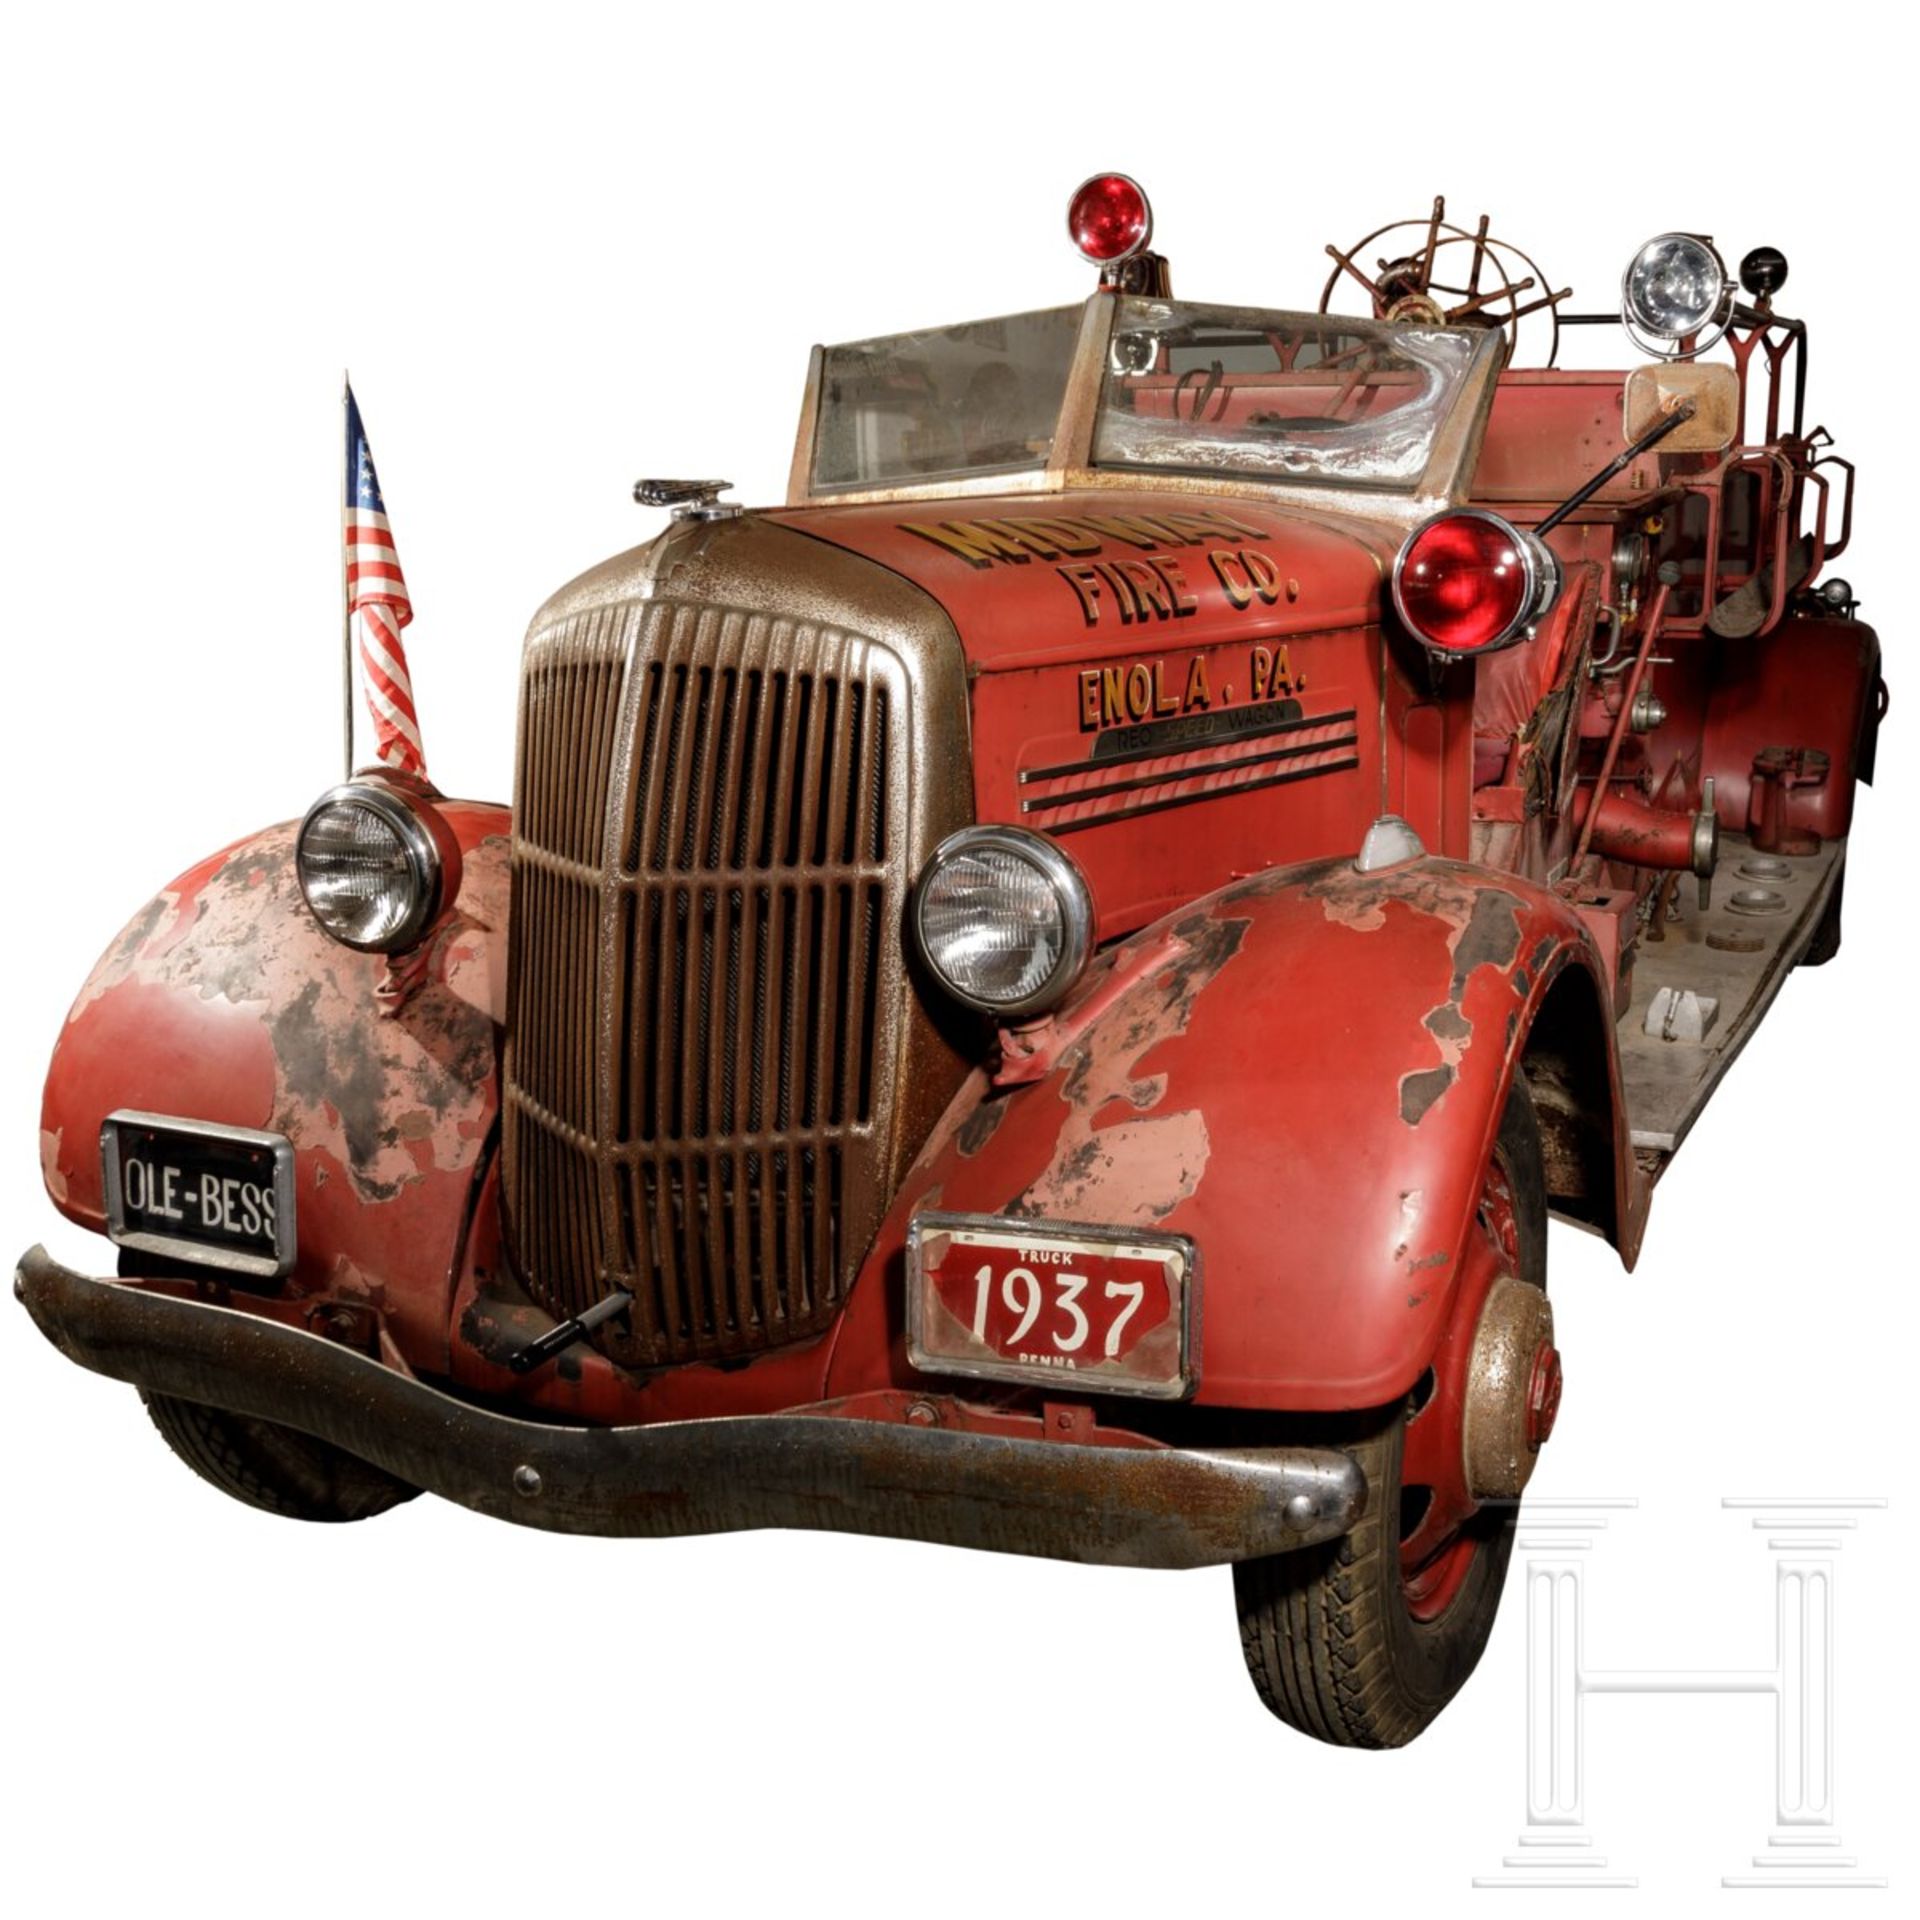 Ransom REO Speed Wagon "Feuerwehrauto", Midway Fire Company, Enola, 1937 - Image 2 of 76